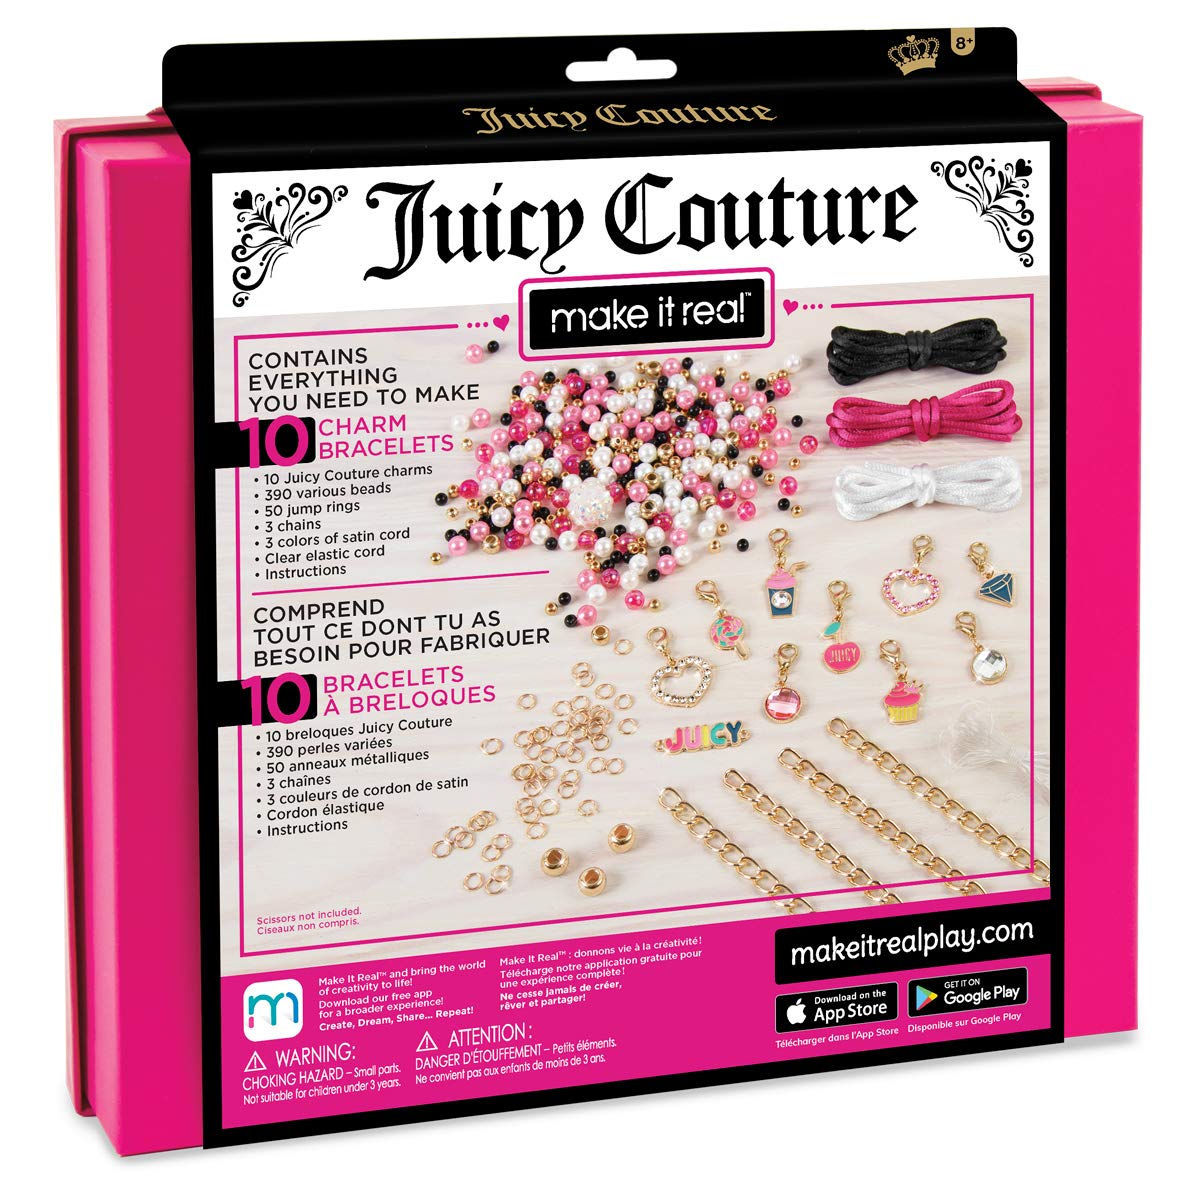 Make it Real - Juicy Couture Pink and Precious Bracelets - DIY Charm Bracelet Kit with Beads for Tween Jewelry Making - Jewelry Making Kit for Girls